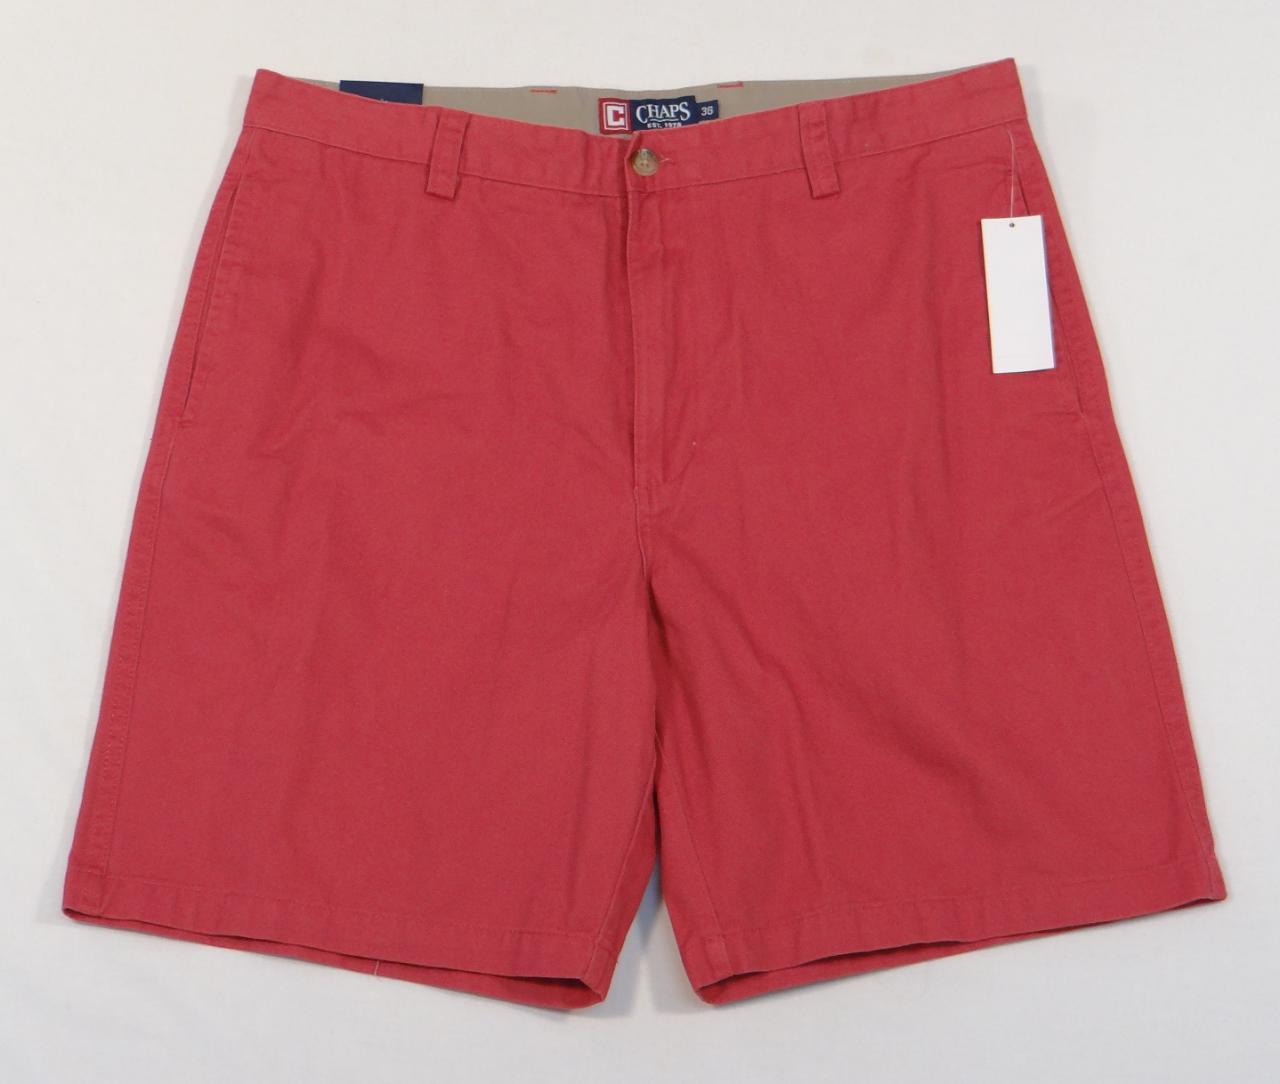 Chaps Dark Red Flat Front Cotton Shorts Men's NWT - $49.99